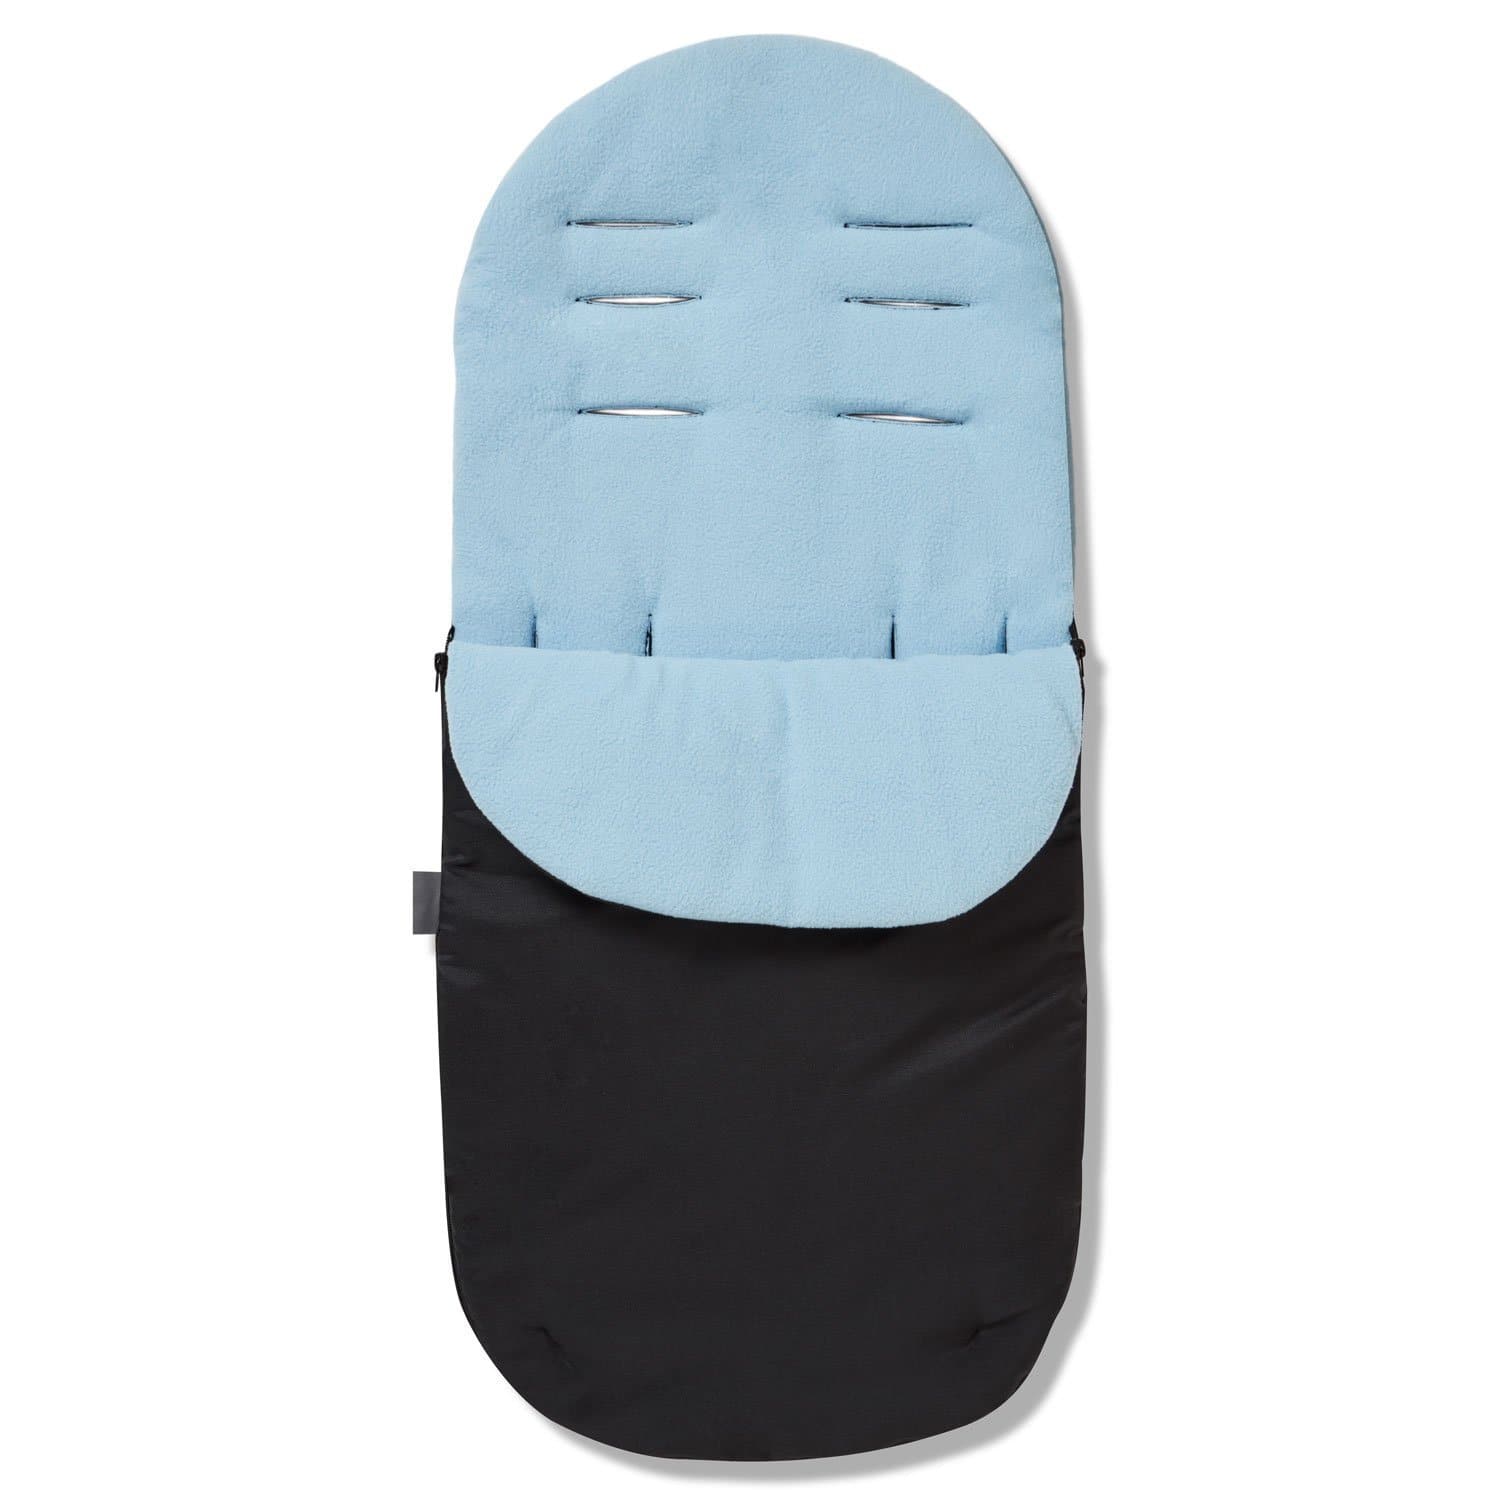 Footmuff / Cosy Toes Compatible with Koelstra - Light Blue / Fits All Models | For Your Little One